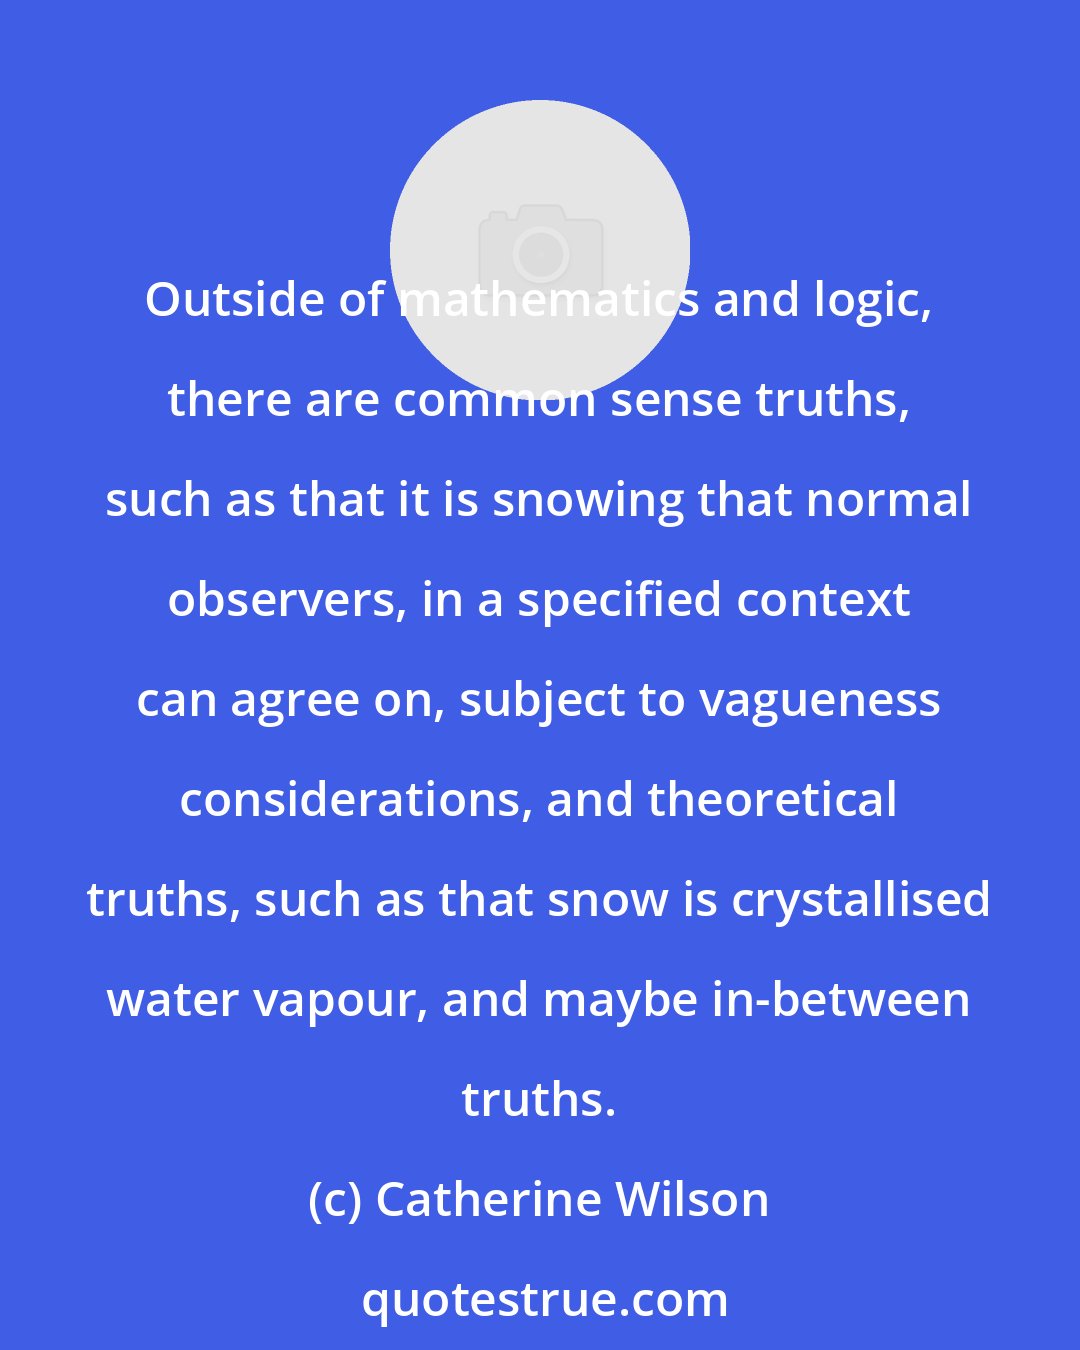 Catherine Wilson: Outside of mathematics and logic, there are common sense truths, such as that it is snowing that normal observers, in a specified context can agree on, subject to vagueness considerations, and theoretical truths, such as that snow is crystallised water vapour, and maybe in-between truths.